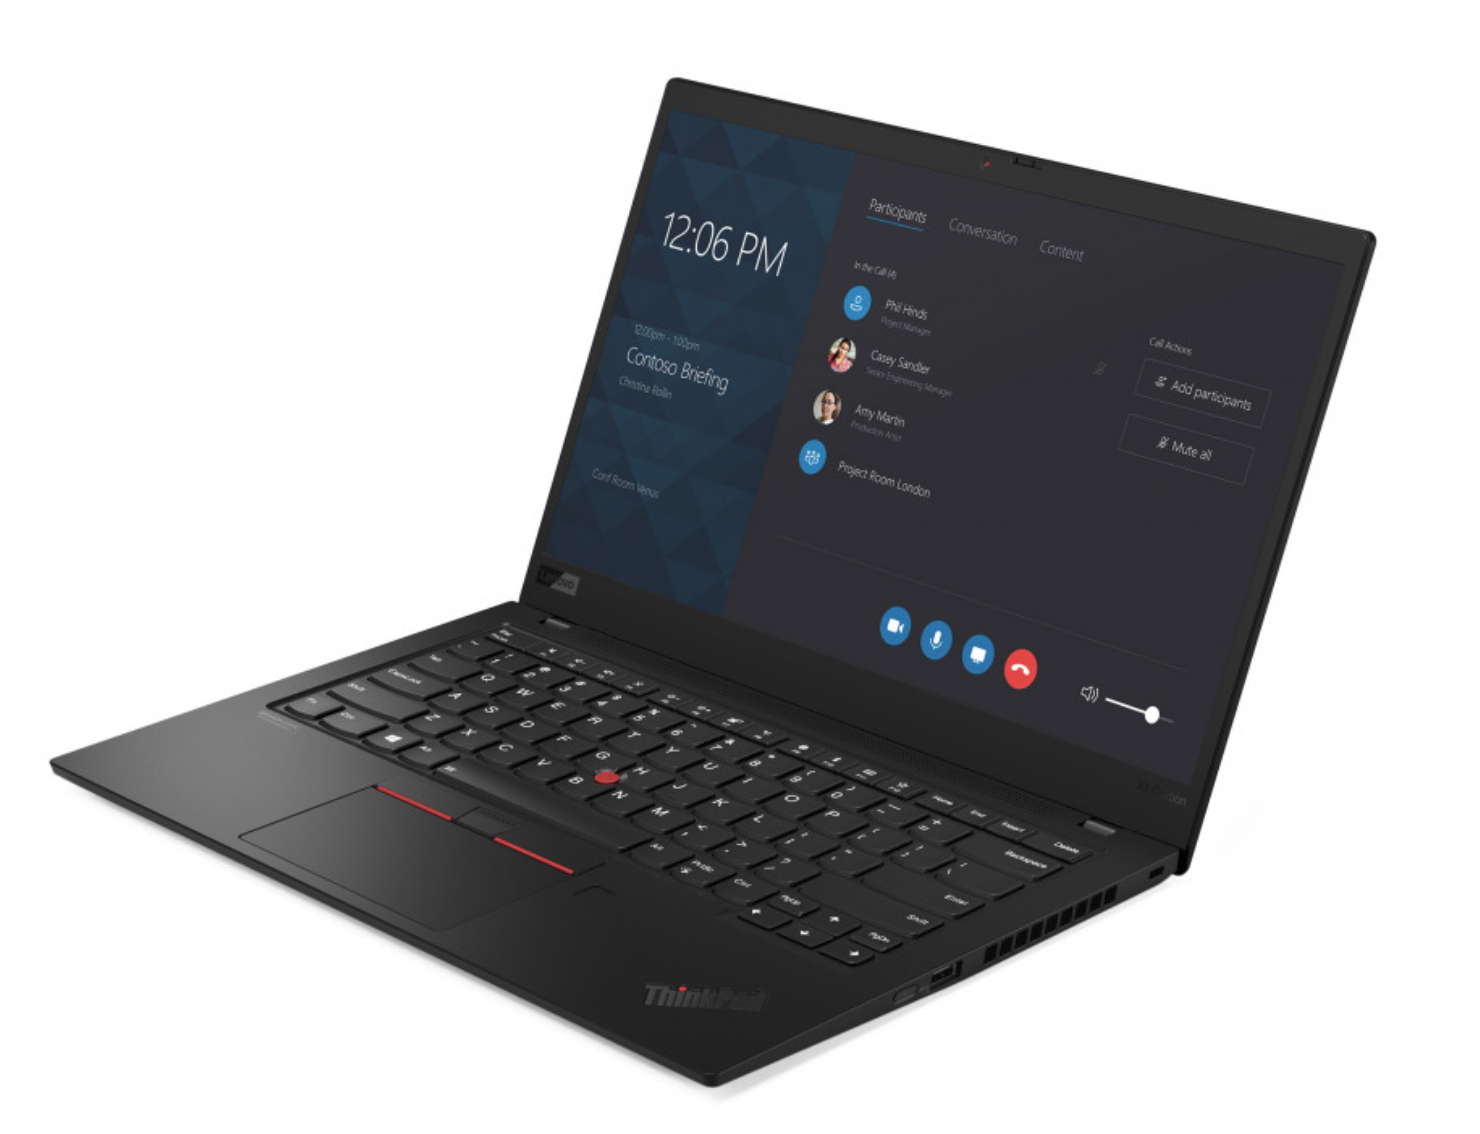 Lenovo ThinkPad X1 Carbon 2019 with Full HD laptop review